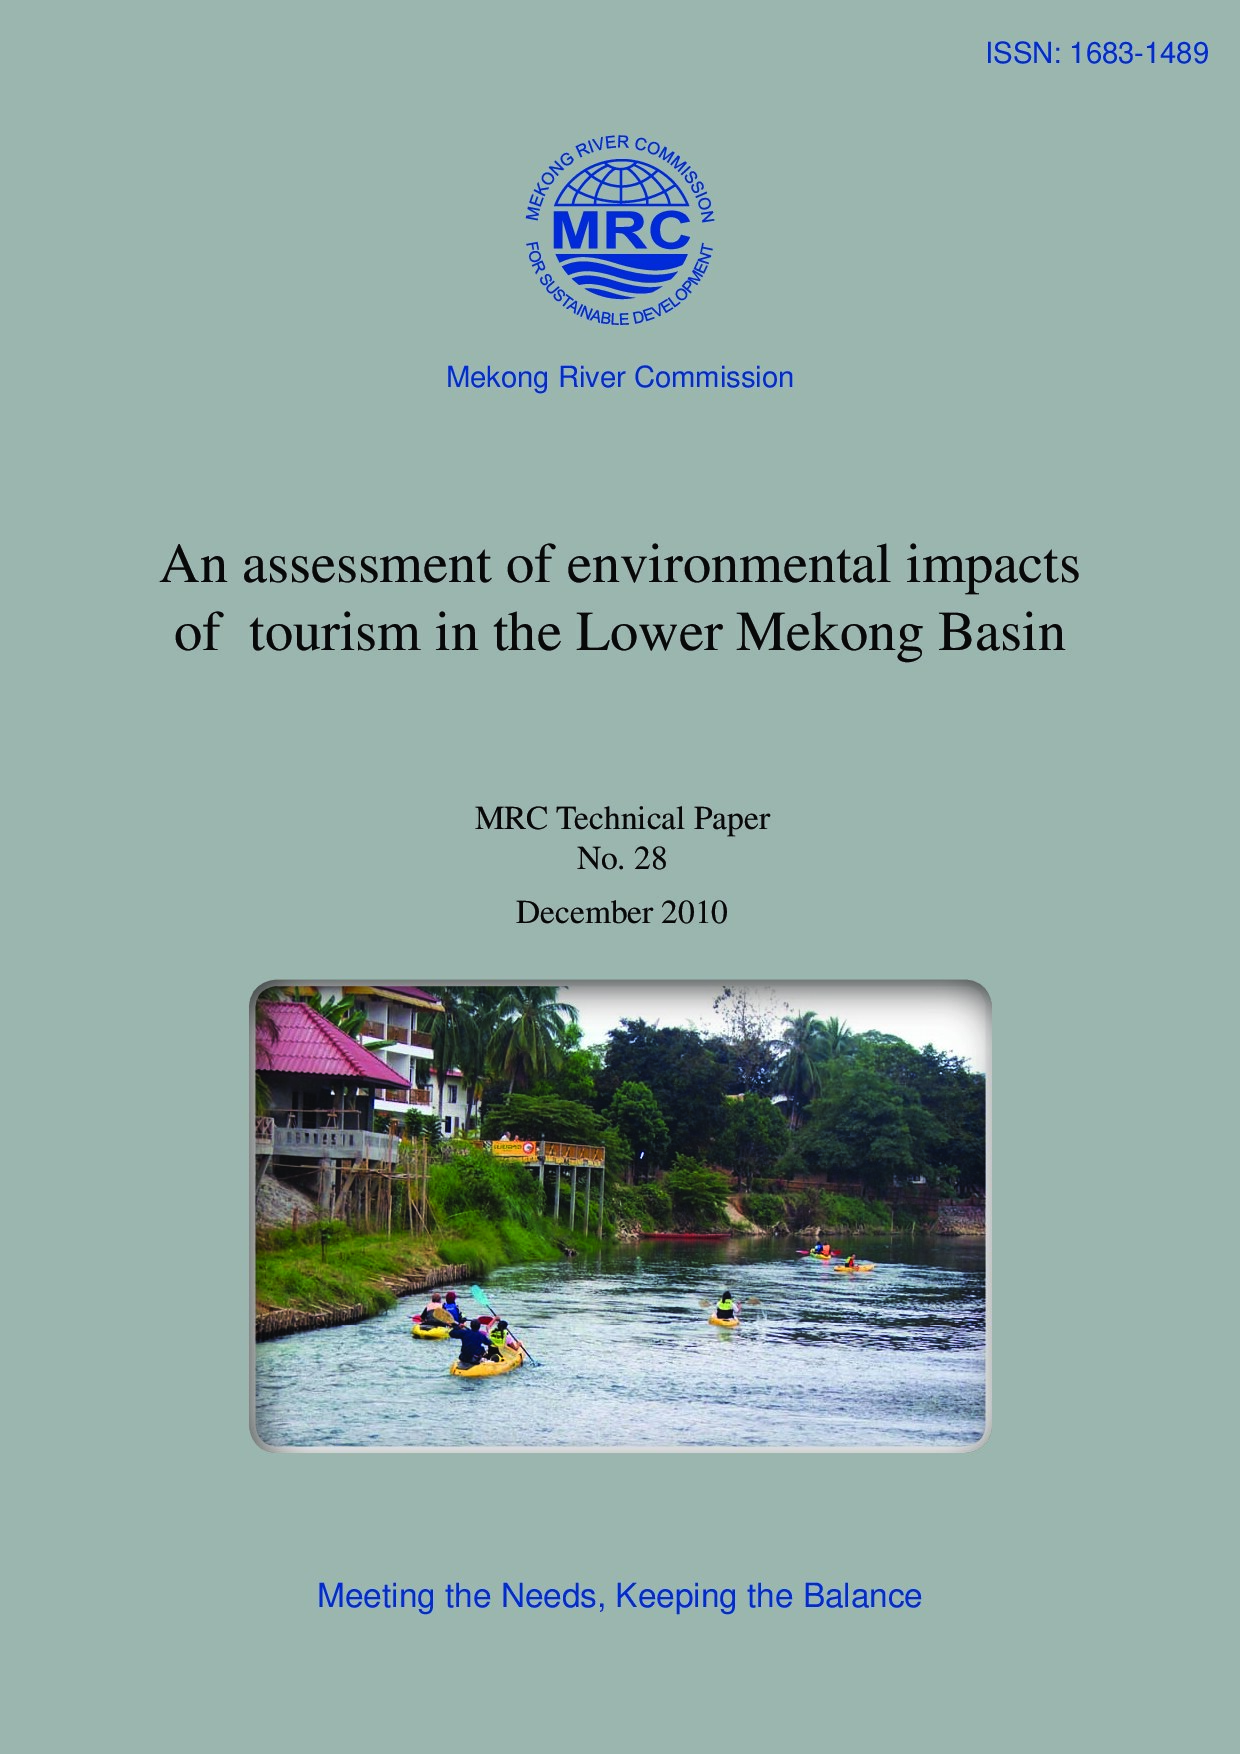 An assessment of environmental impacts of tourism in the Lower Mekong Basin